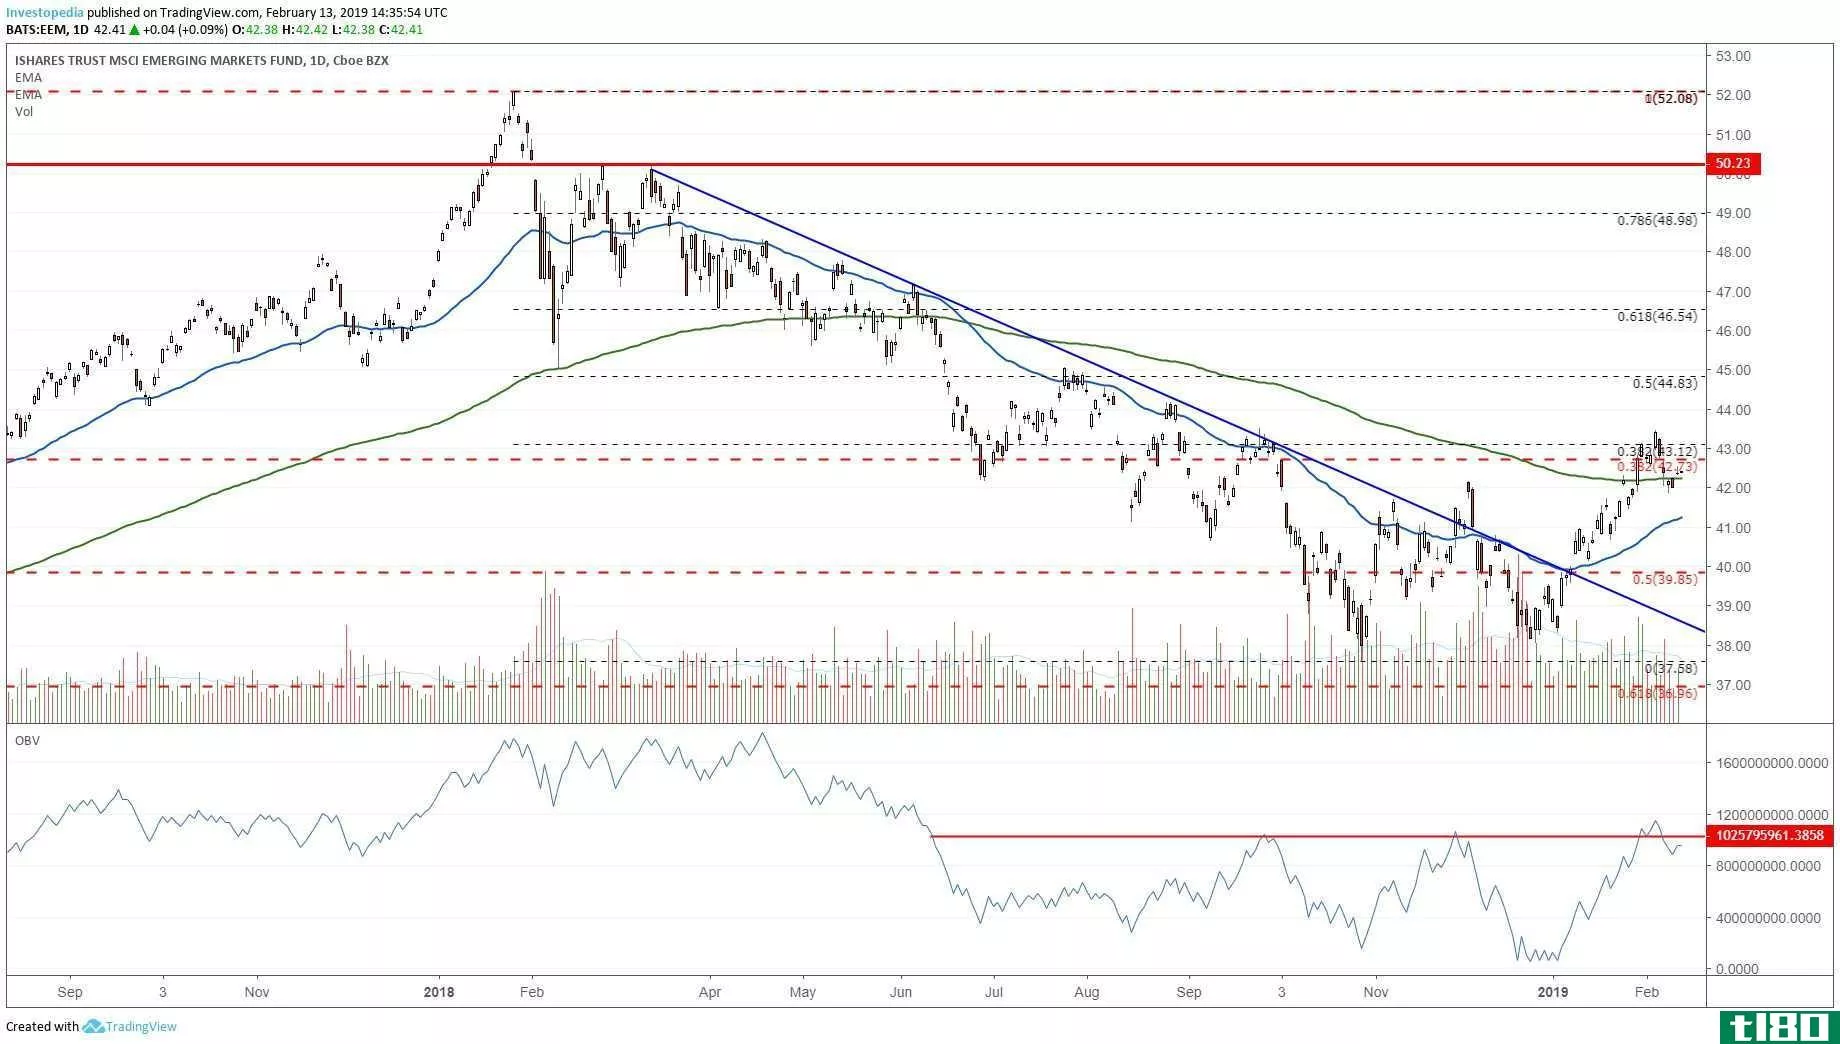 Long-term technical chart showing the share price performance of the iShares MSCI Emerging Markets ETF (EEM)